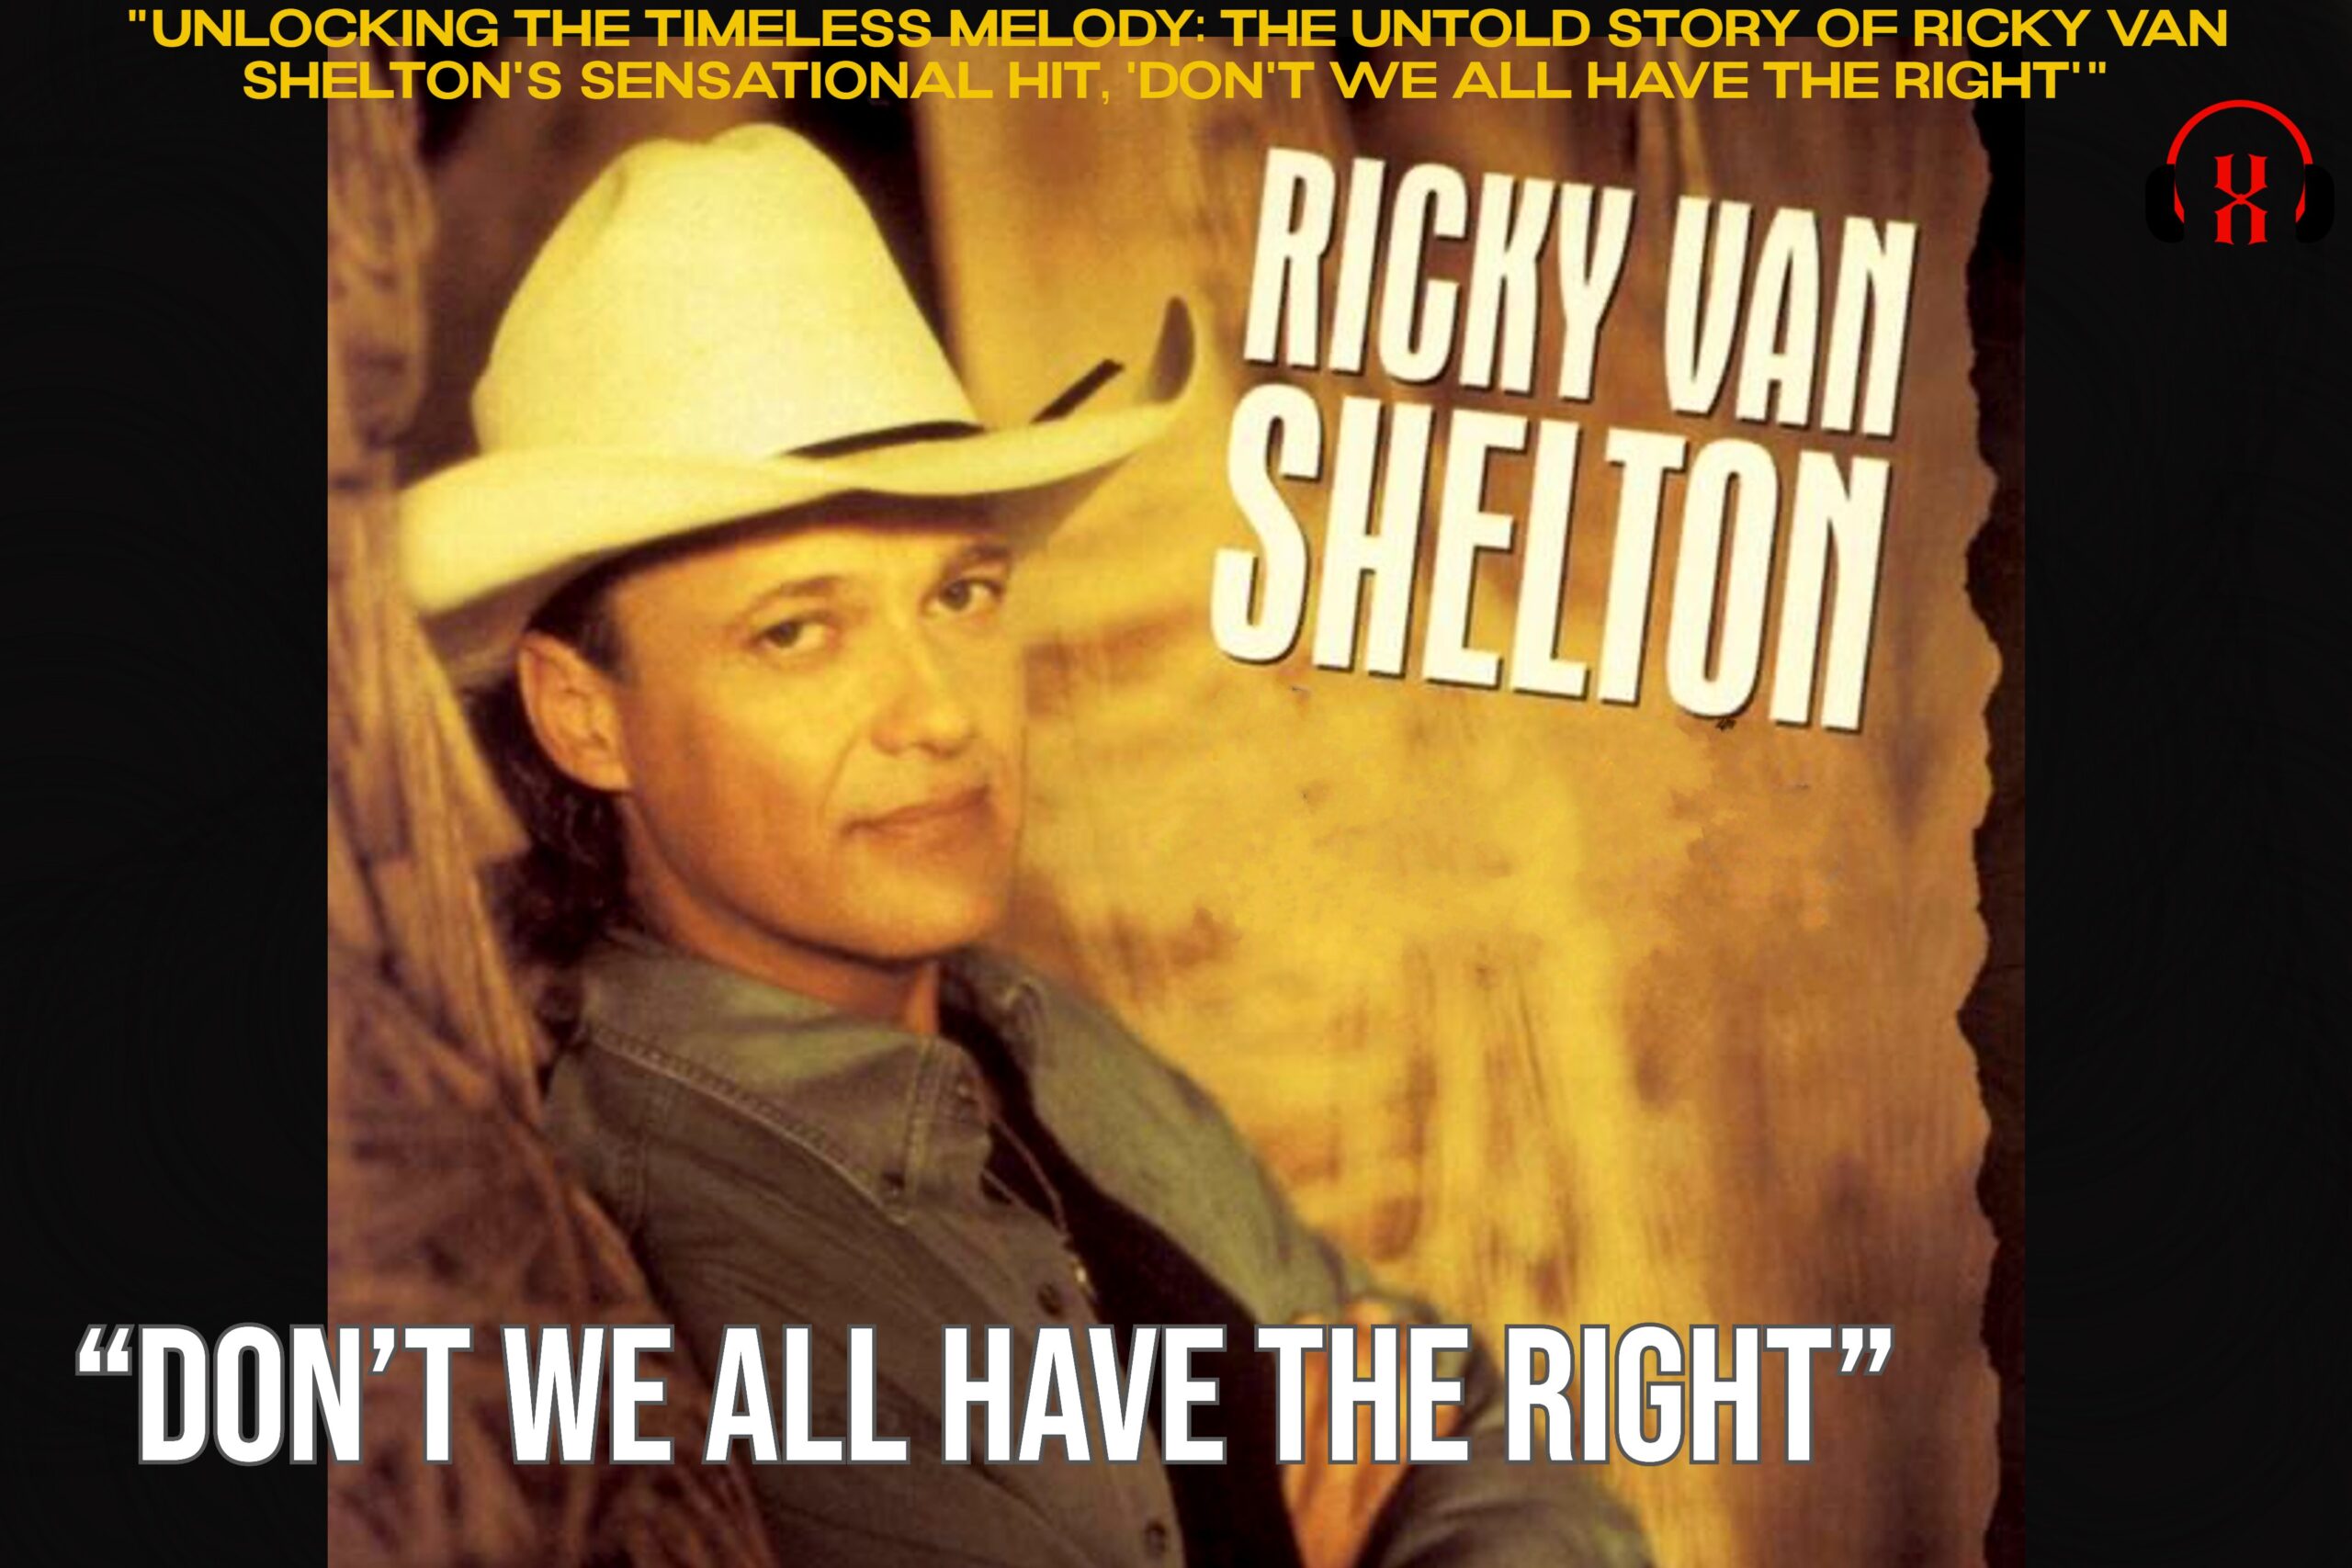 "Unlocking the Timeless Melody: The Untold Story of Ricky Van Shelton's Sensational Hit, 'Don't We All Have the Right'"